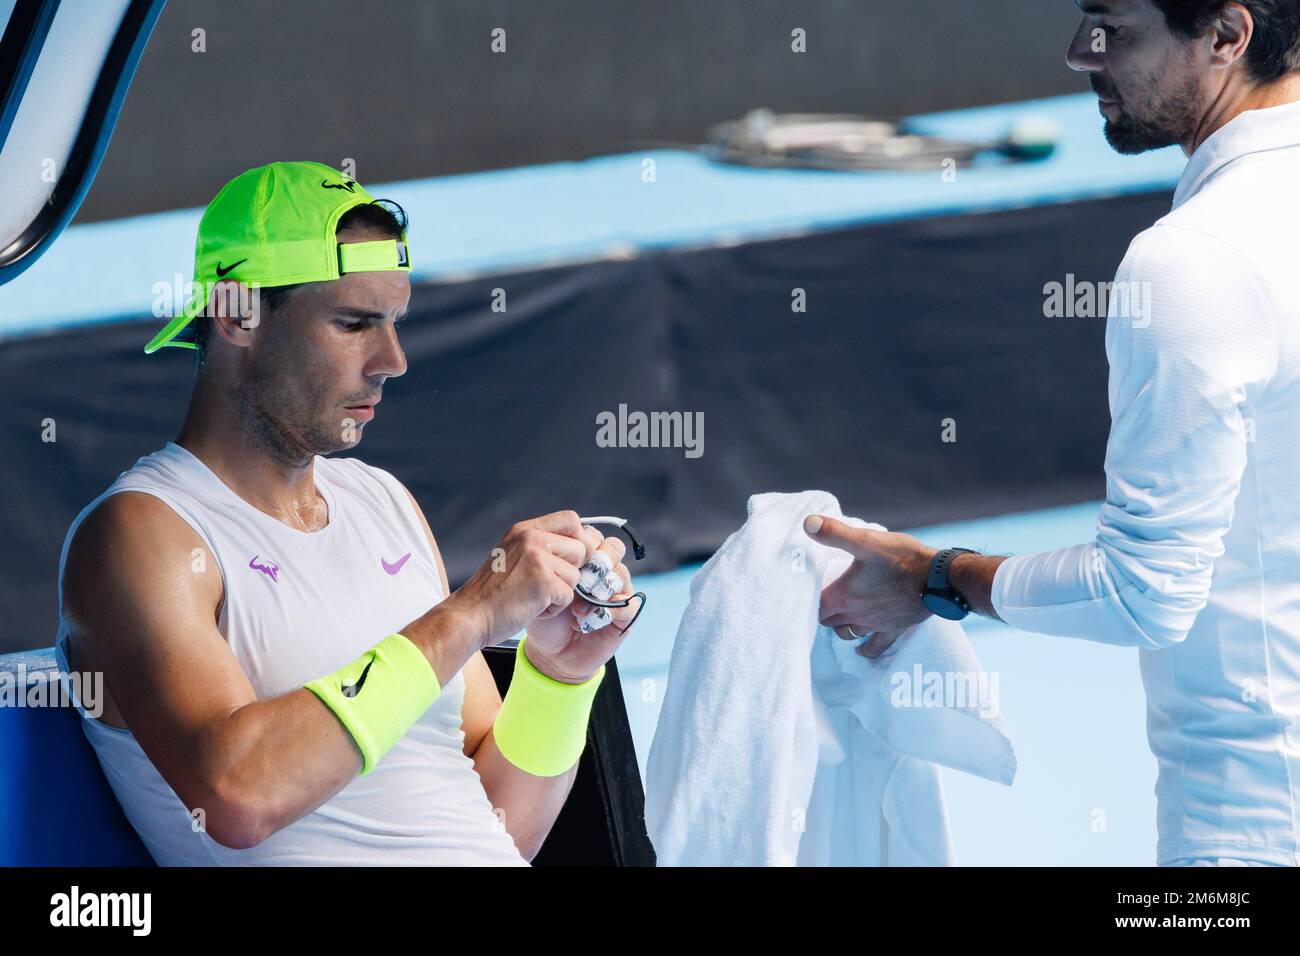 Melbourne, Australia. January 5, 2023: RAFAEL NADAL (ESP) winds his Richard Mille watch during a practice session on Rod Laver Arena ahead of the 2023 Australian Open in Melbourne, Australia. Sydney Low/Cal Sport Media Credit: Cal Sport Media/Alamy Live News Stock Photo